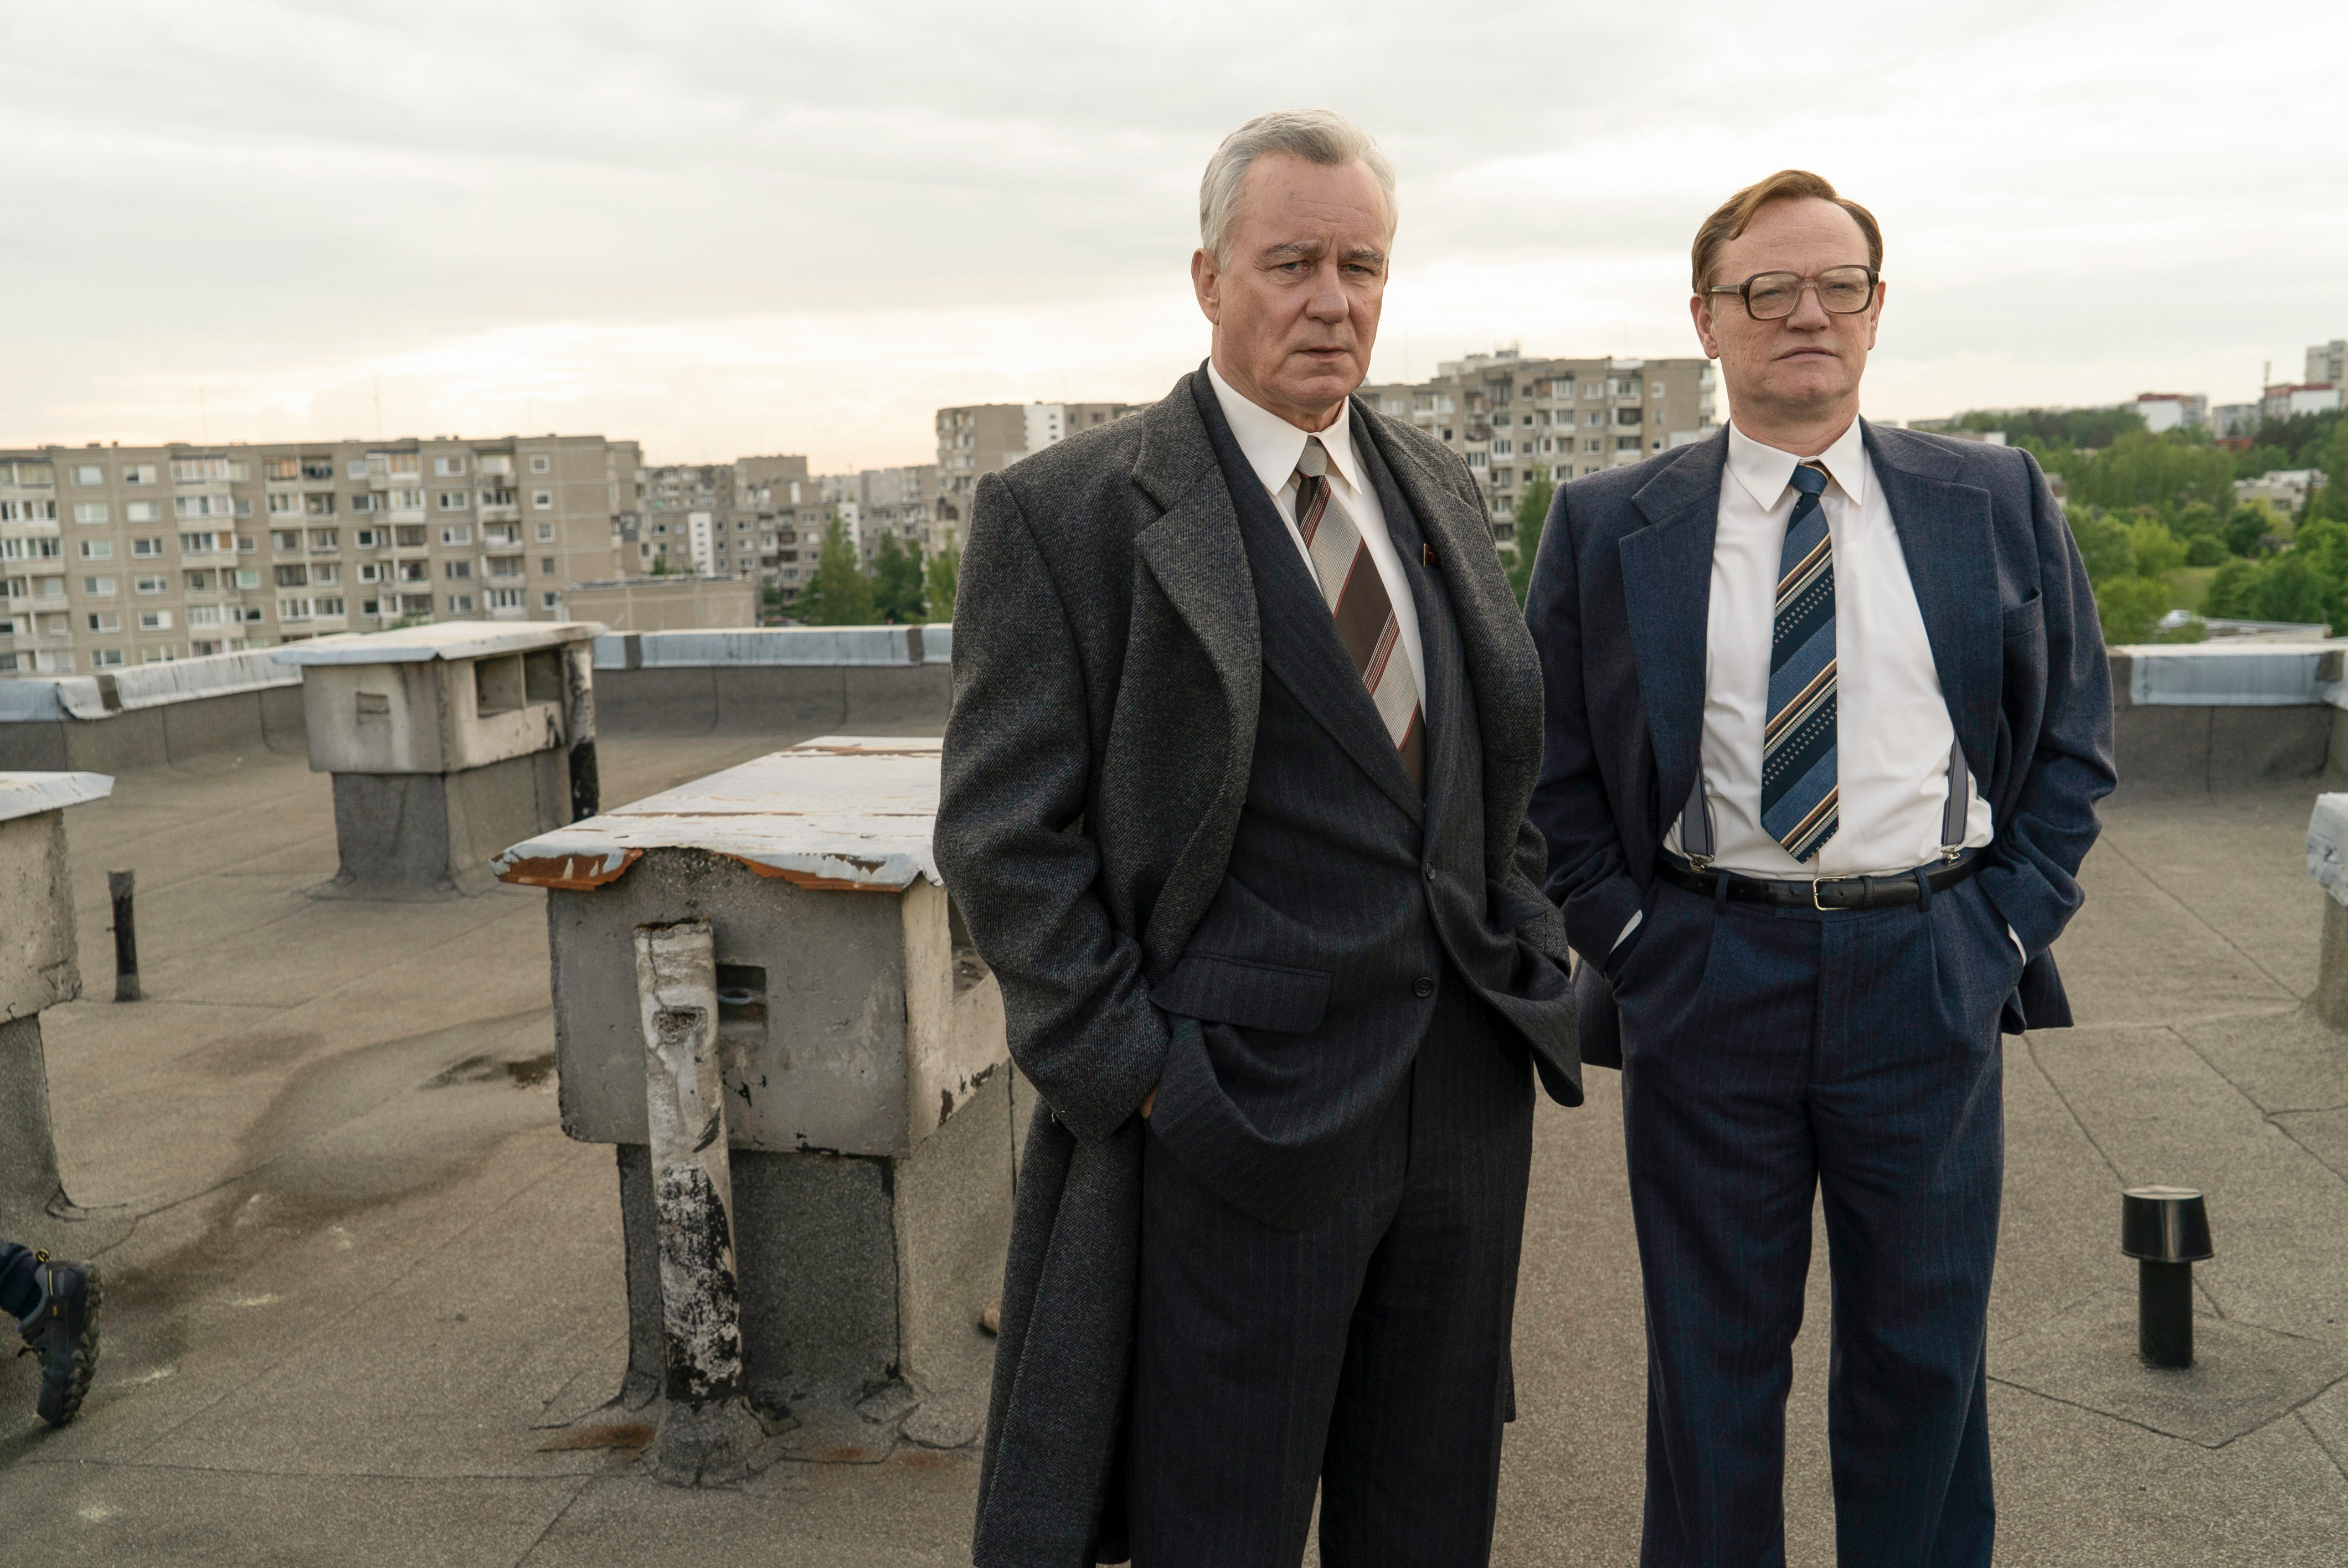 Chernobyl episode 5 release date